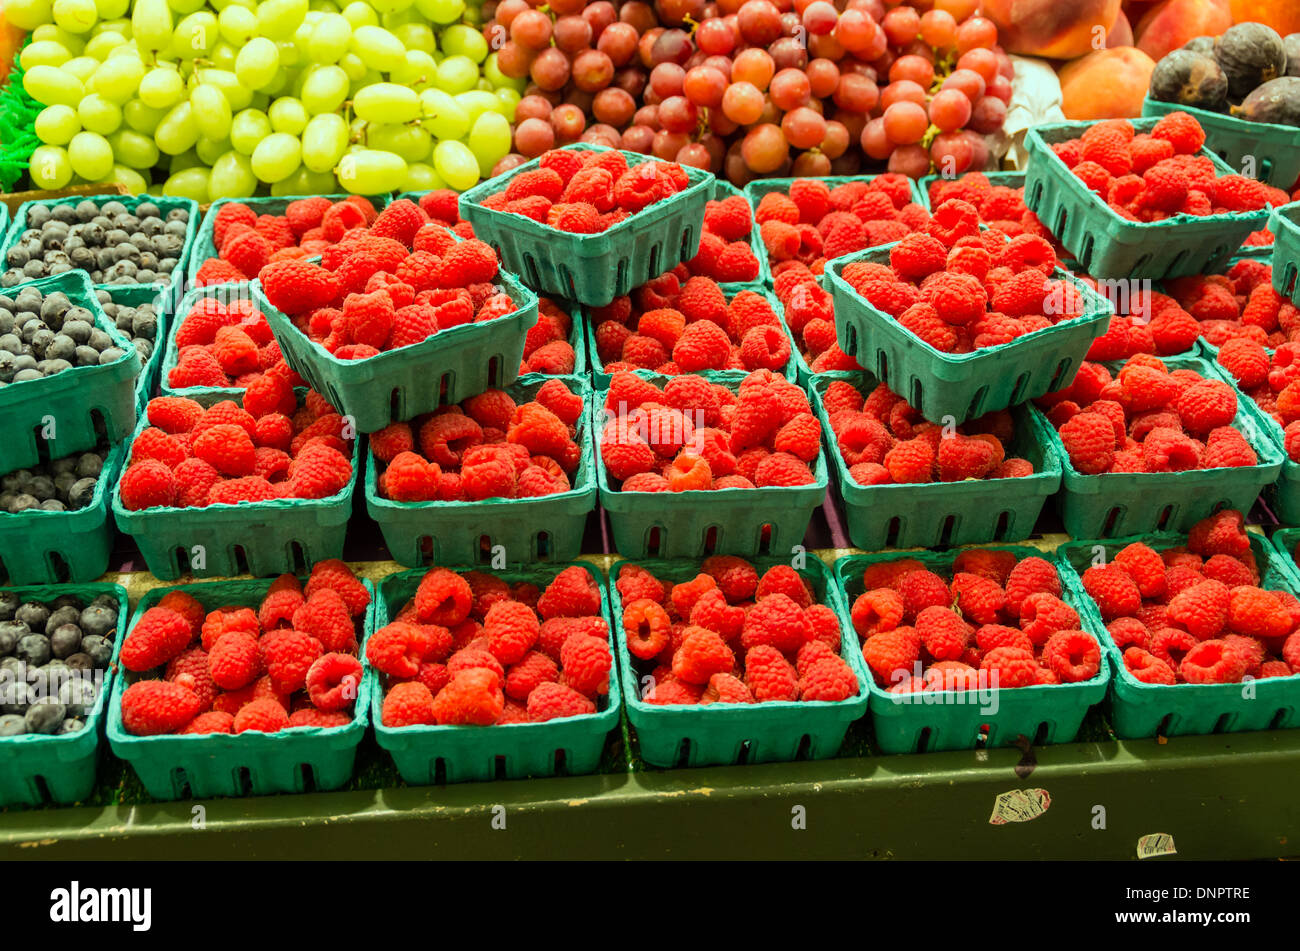 Red raspberries in small boxes on display at a market stall Pike Place Market Seattle, Washington, USA Stock Photo